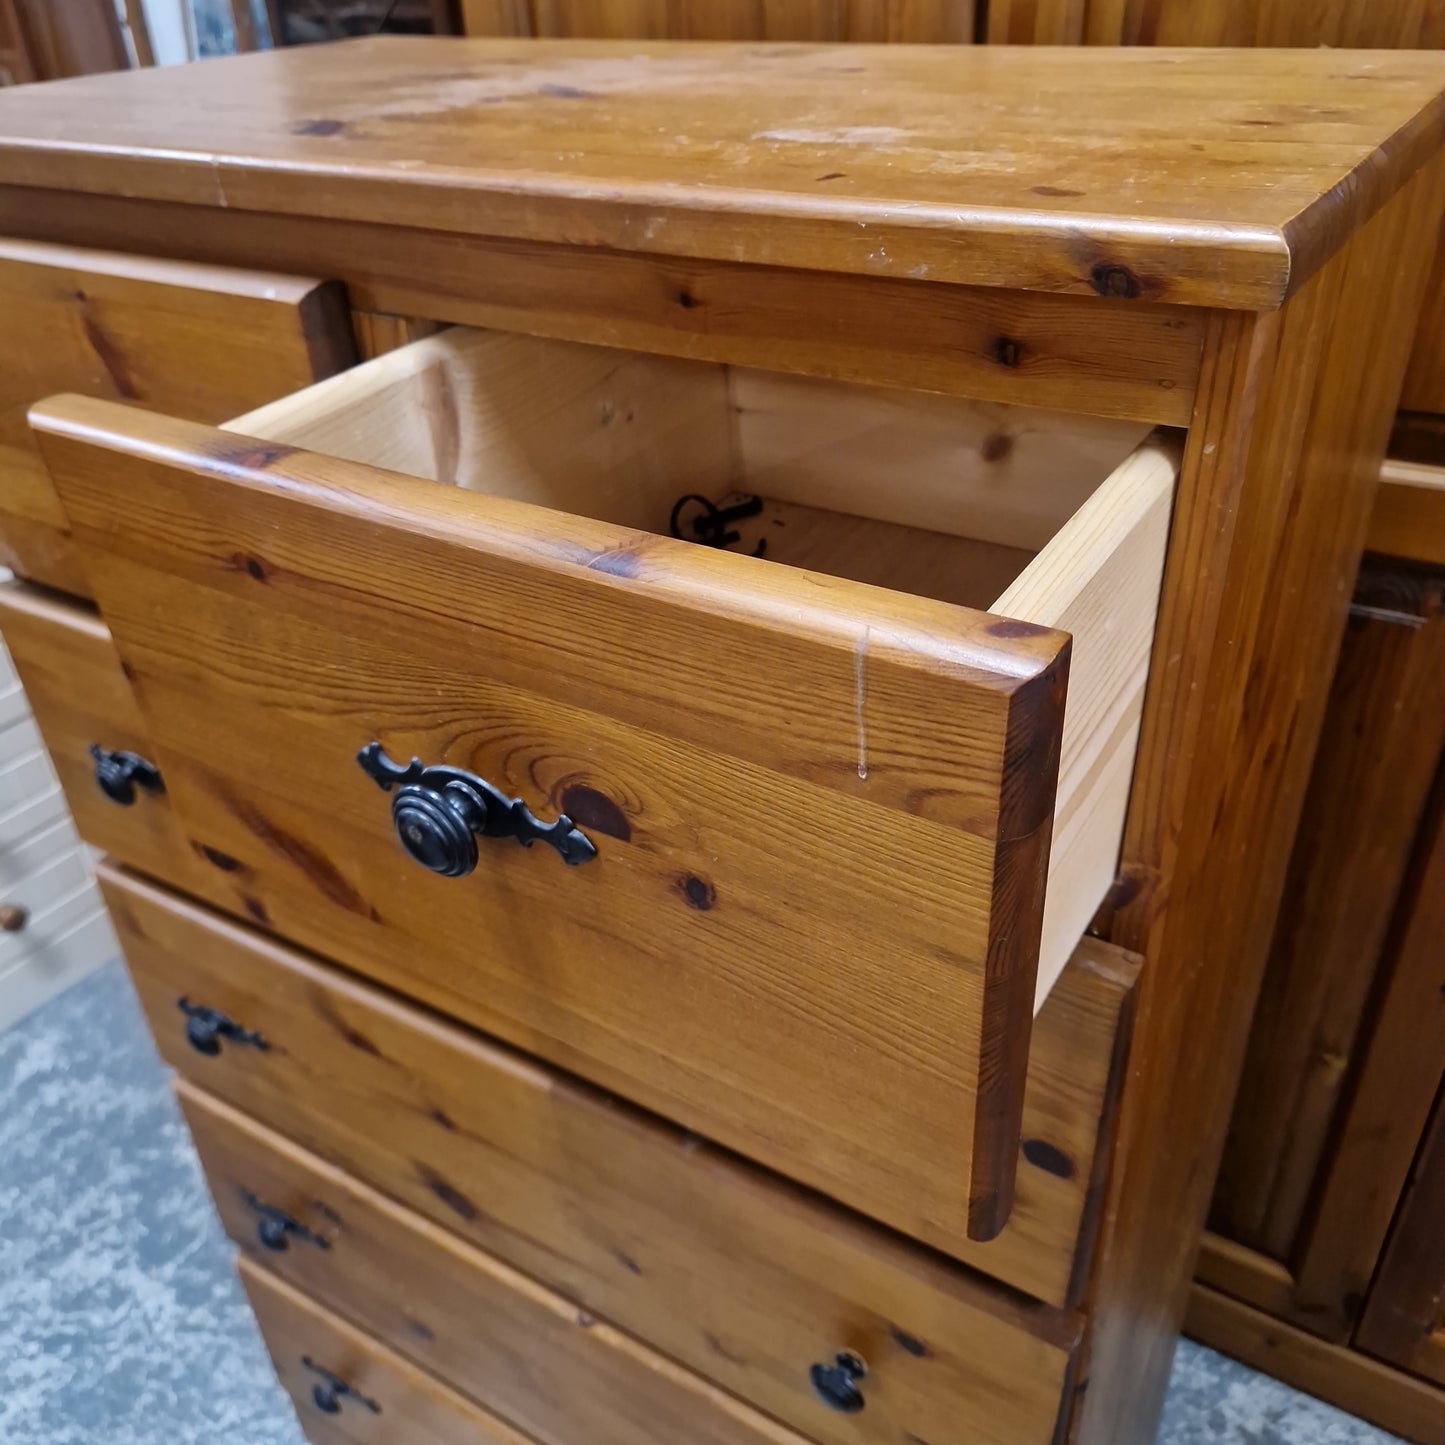 4+2 Tall solid pine chest of drawers